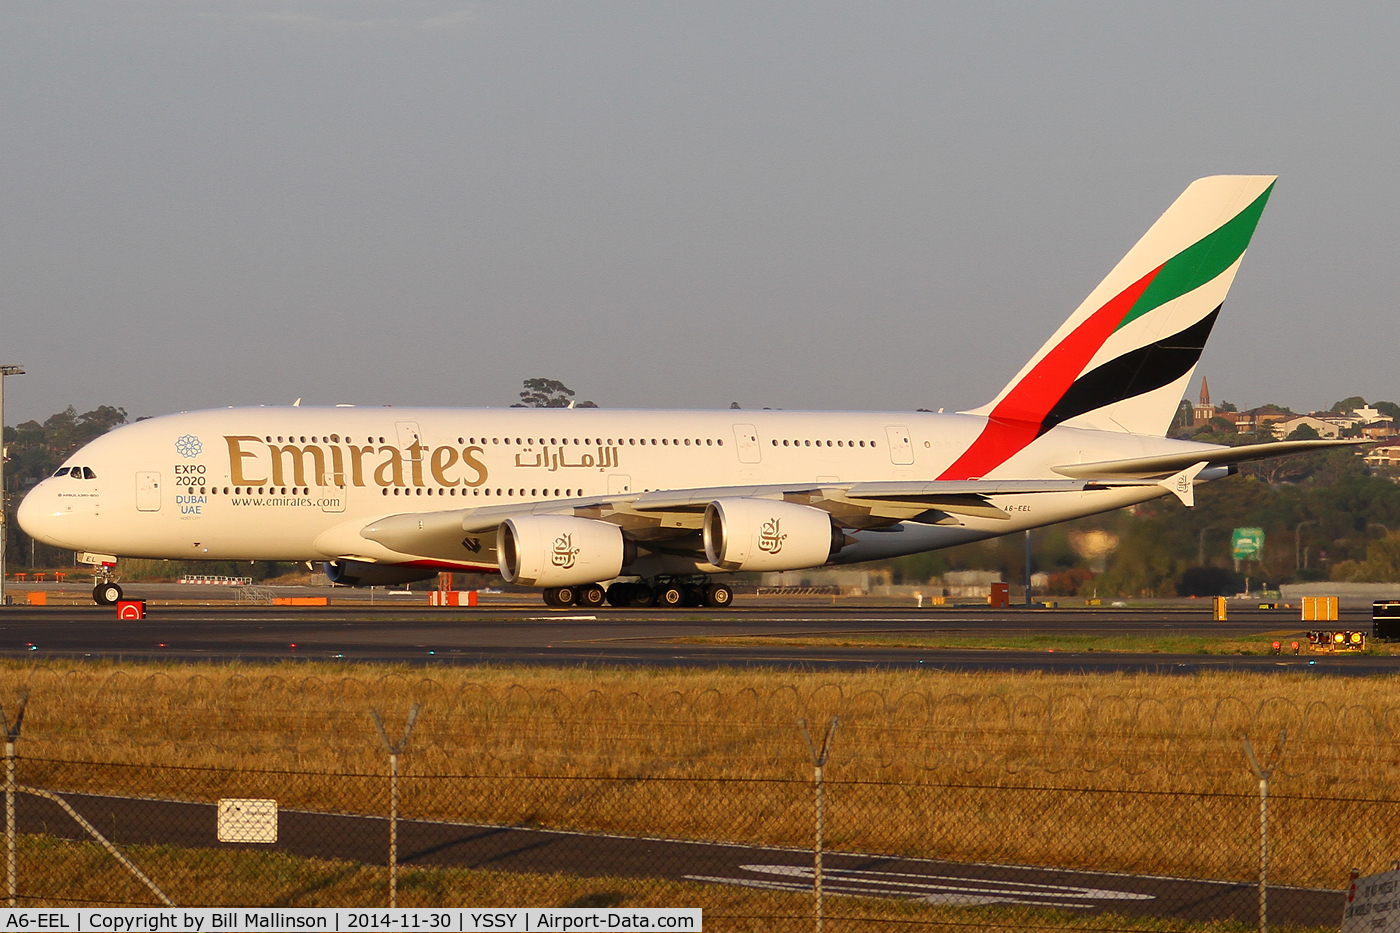 A6-EEL, 2013 Airbus A380-861 C/N 133, taxiing to 34L